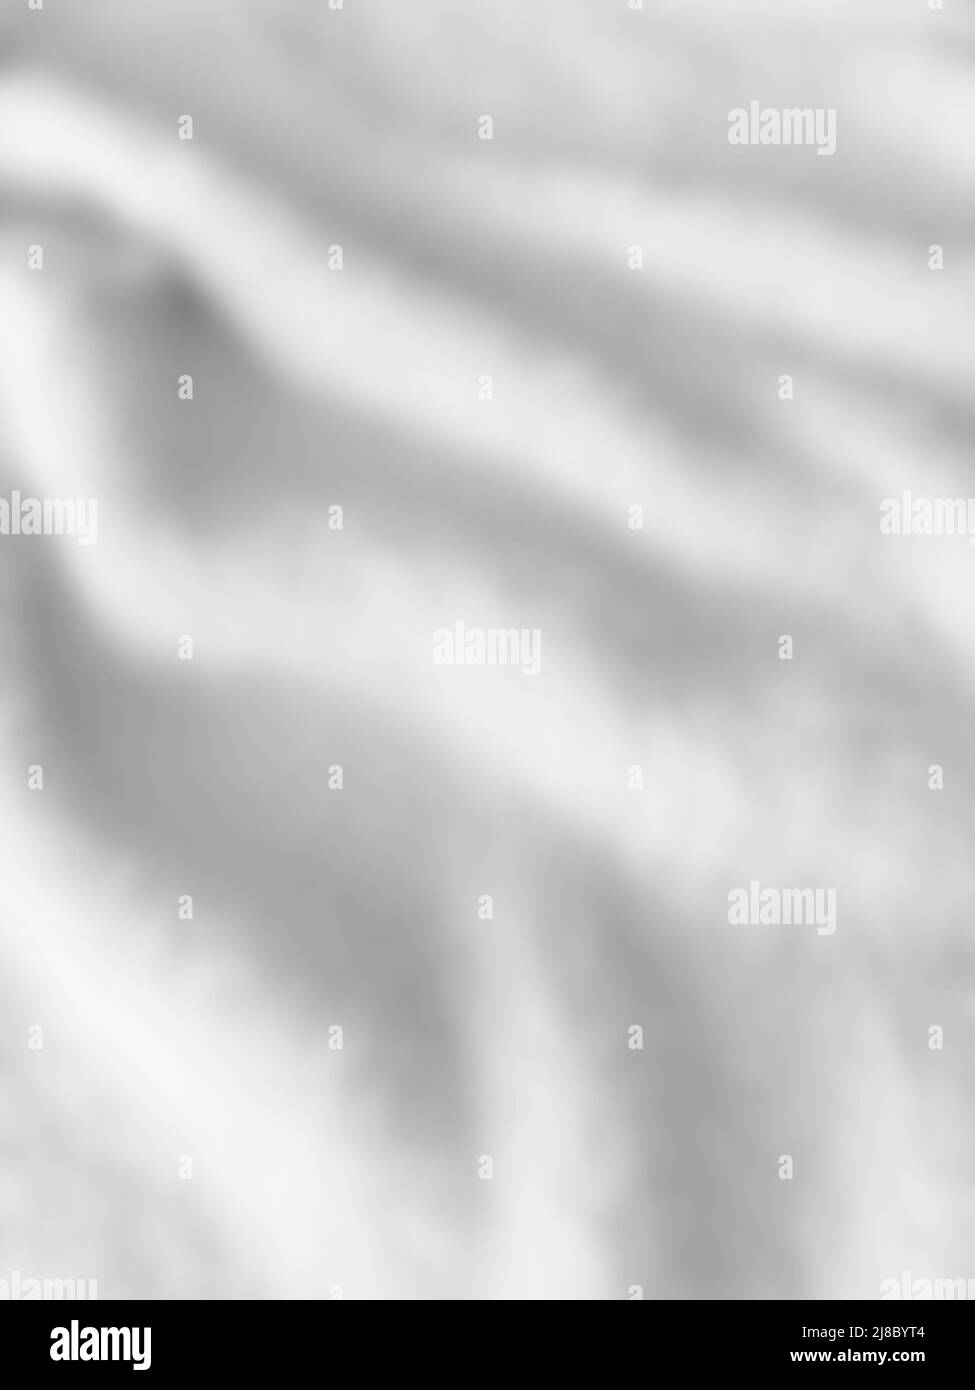 Abstract gray vector background - stock illustration Stock Photo